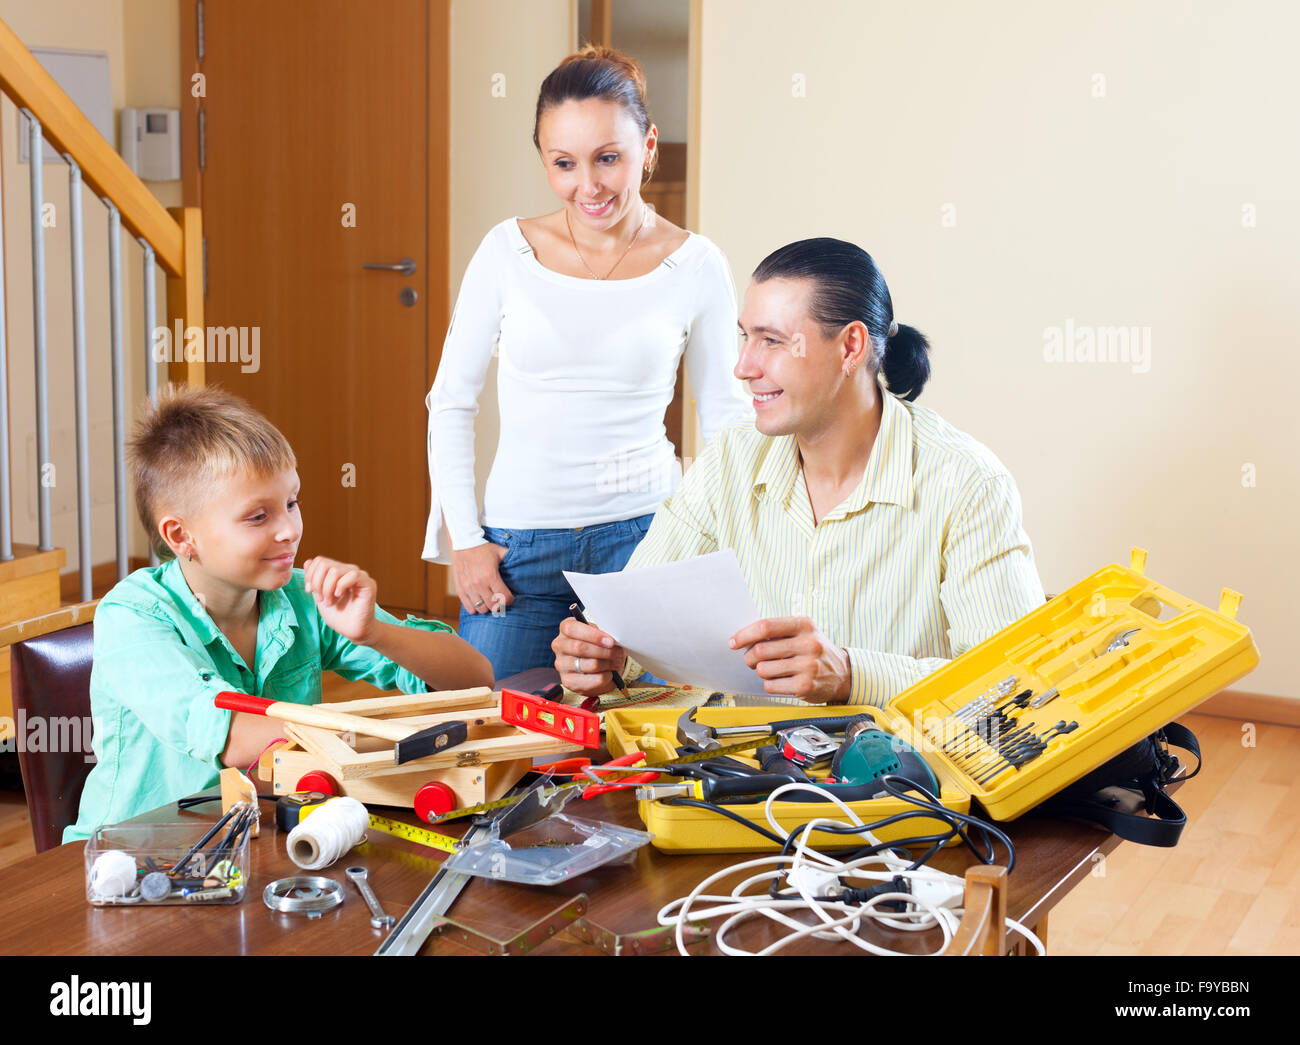 Happy family together doing something with working tools at home Stock Photo